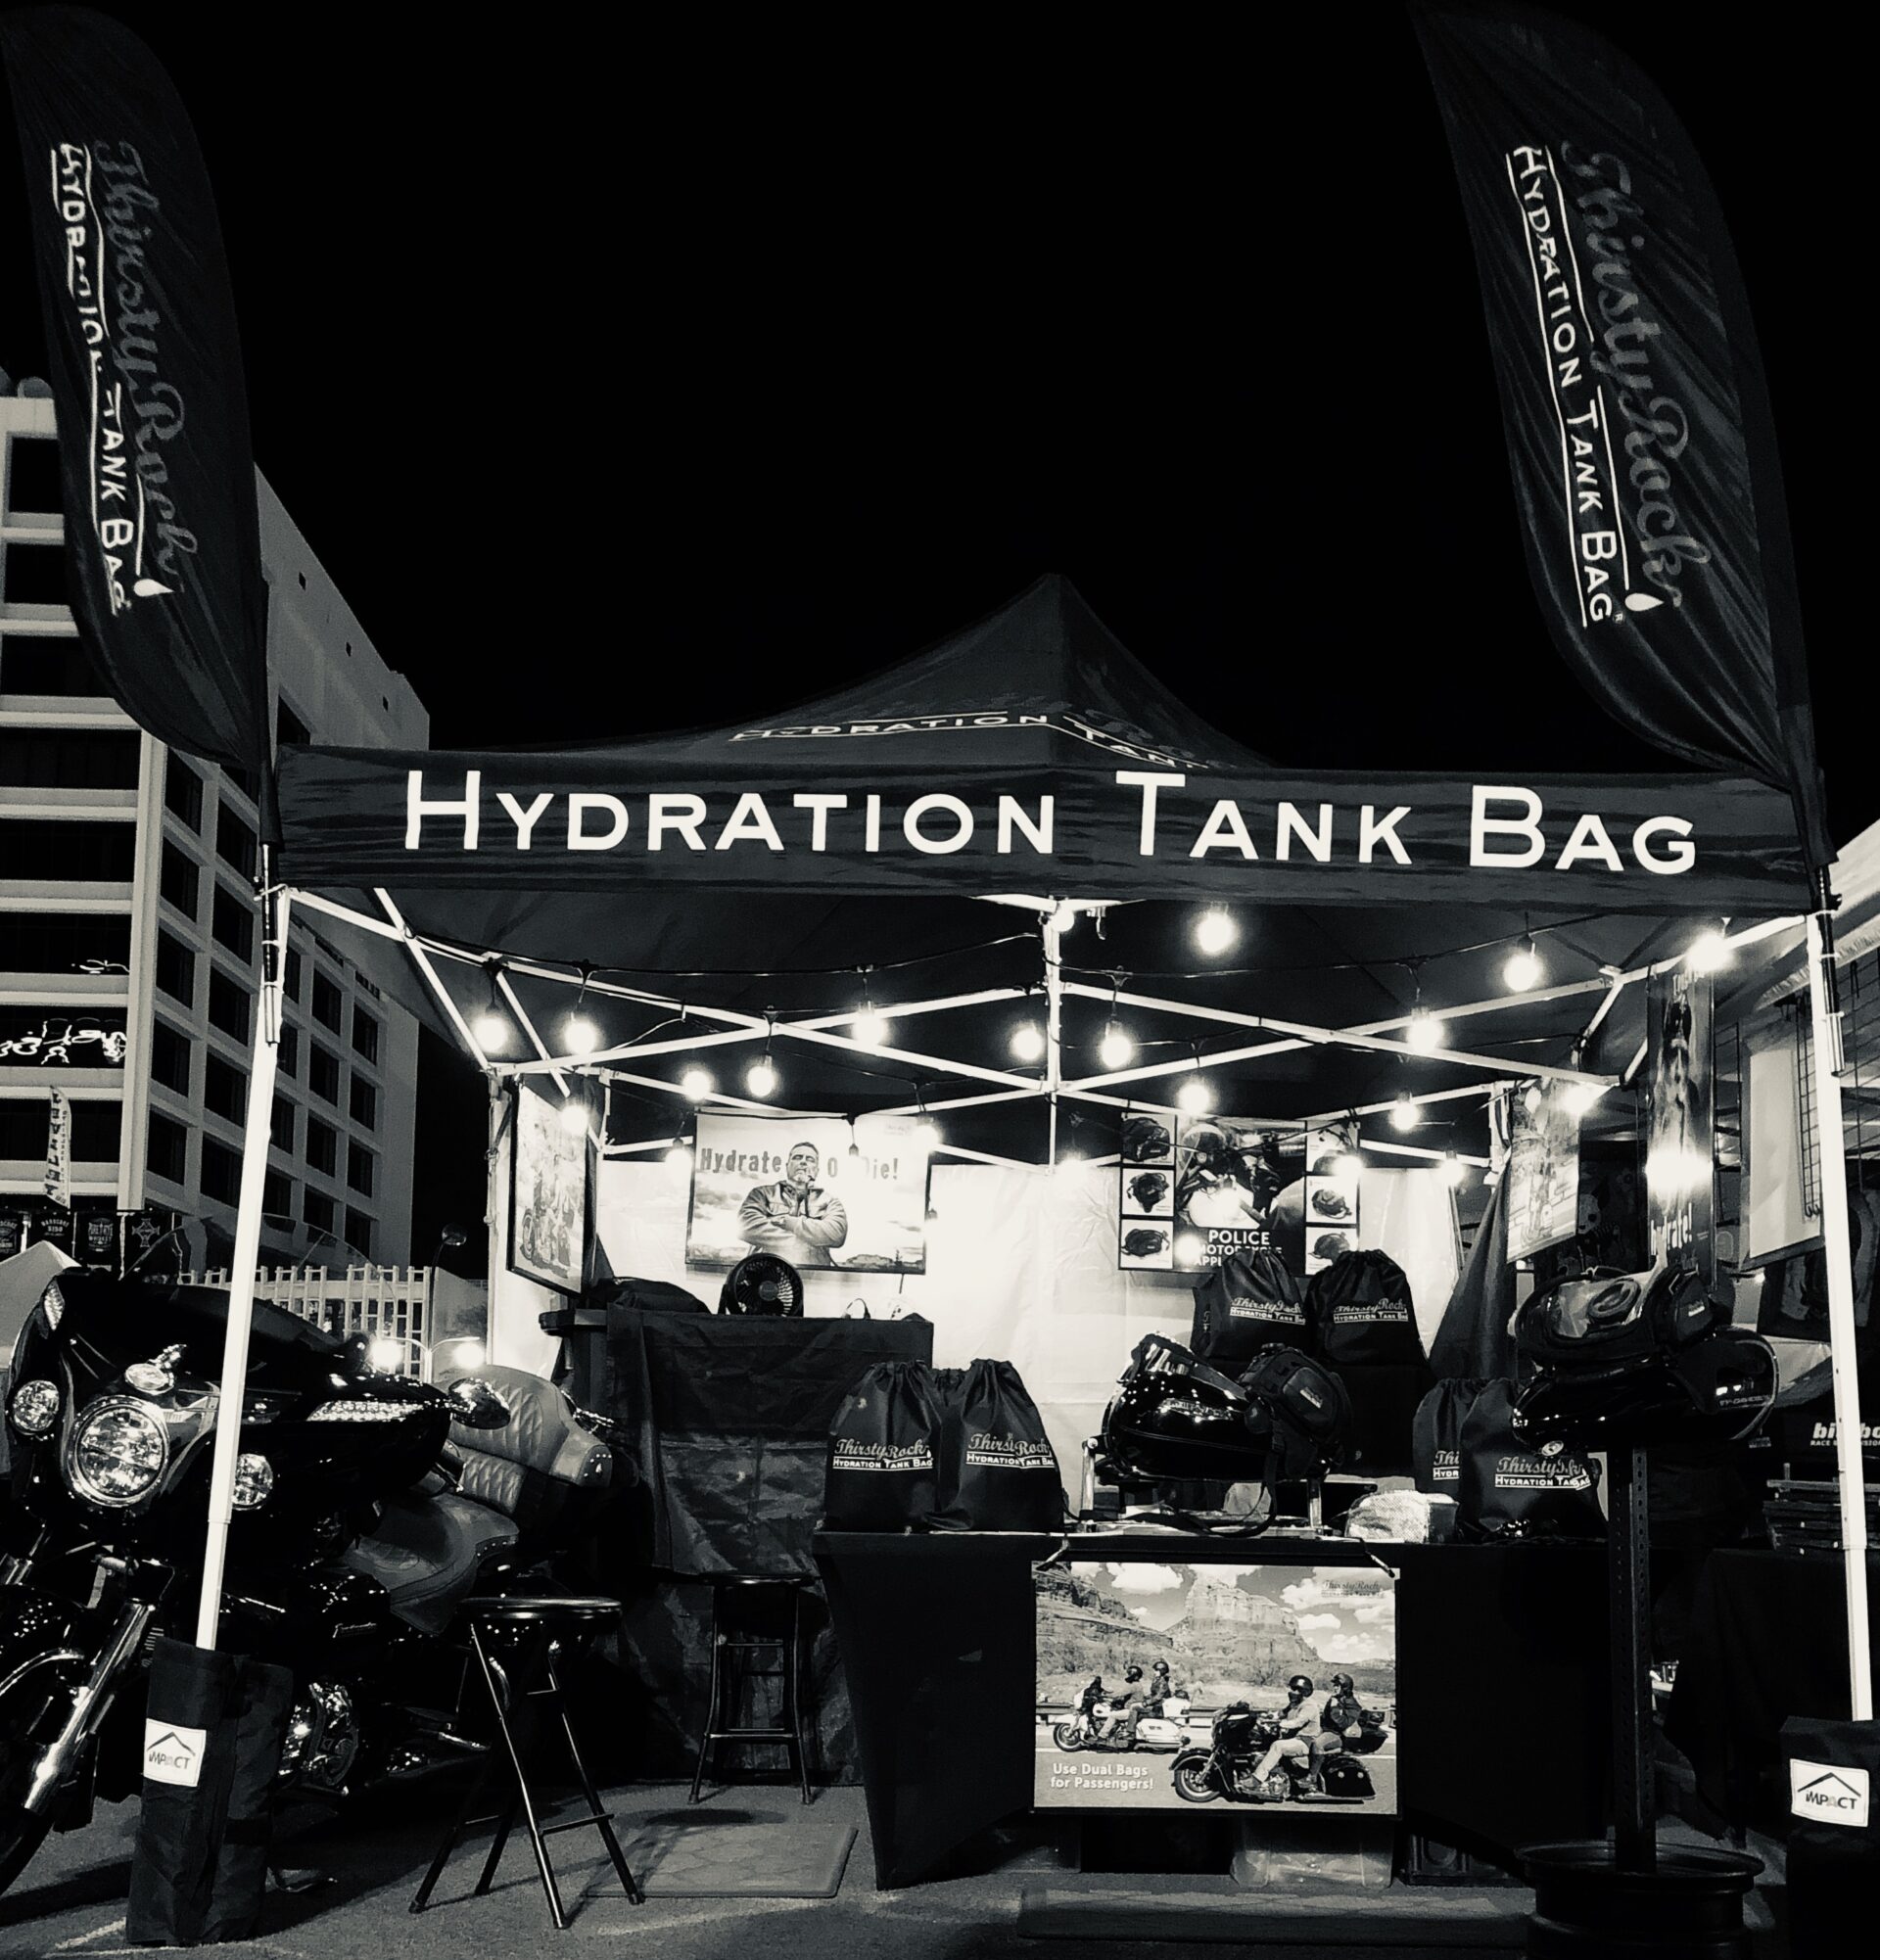 ThirstyRock product tent